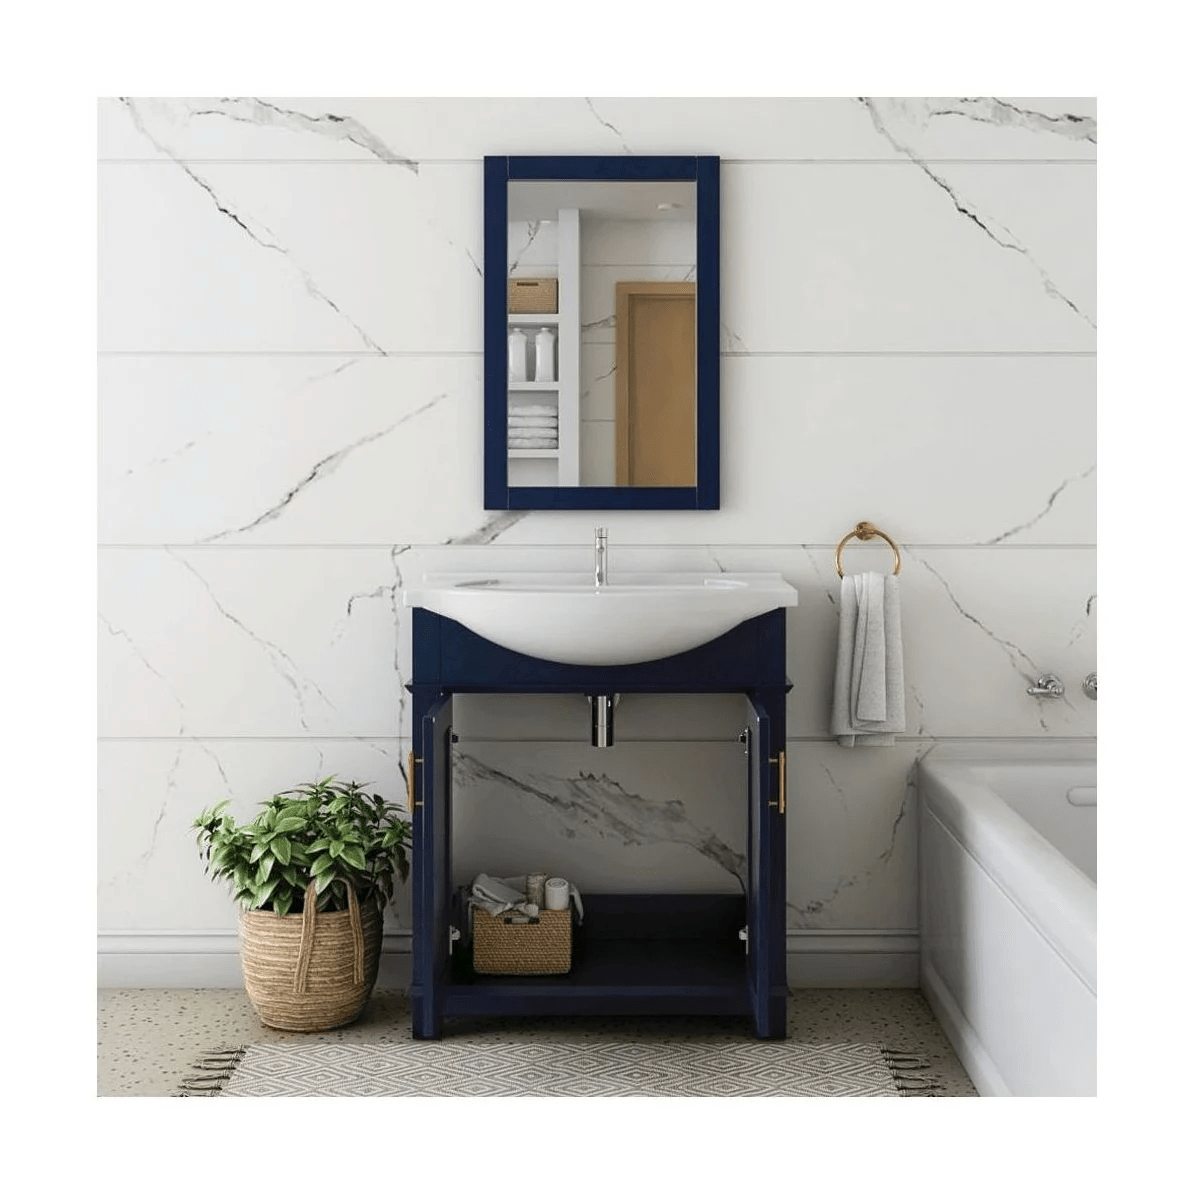 Fresca Hartford Royal Blue 24" Free Standing Single Basin Vanity with Cabinet and Ceramic Vanity Top